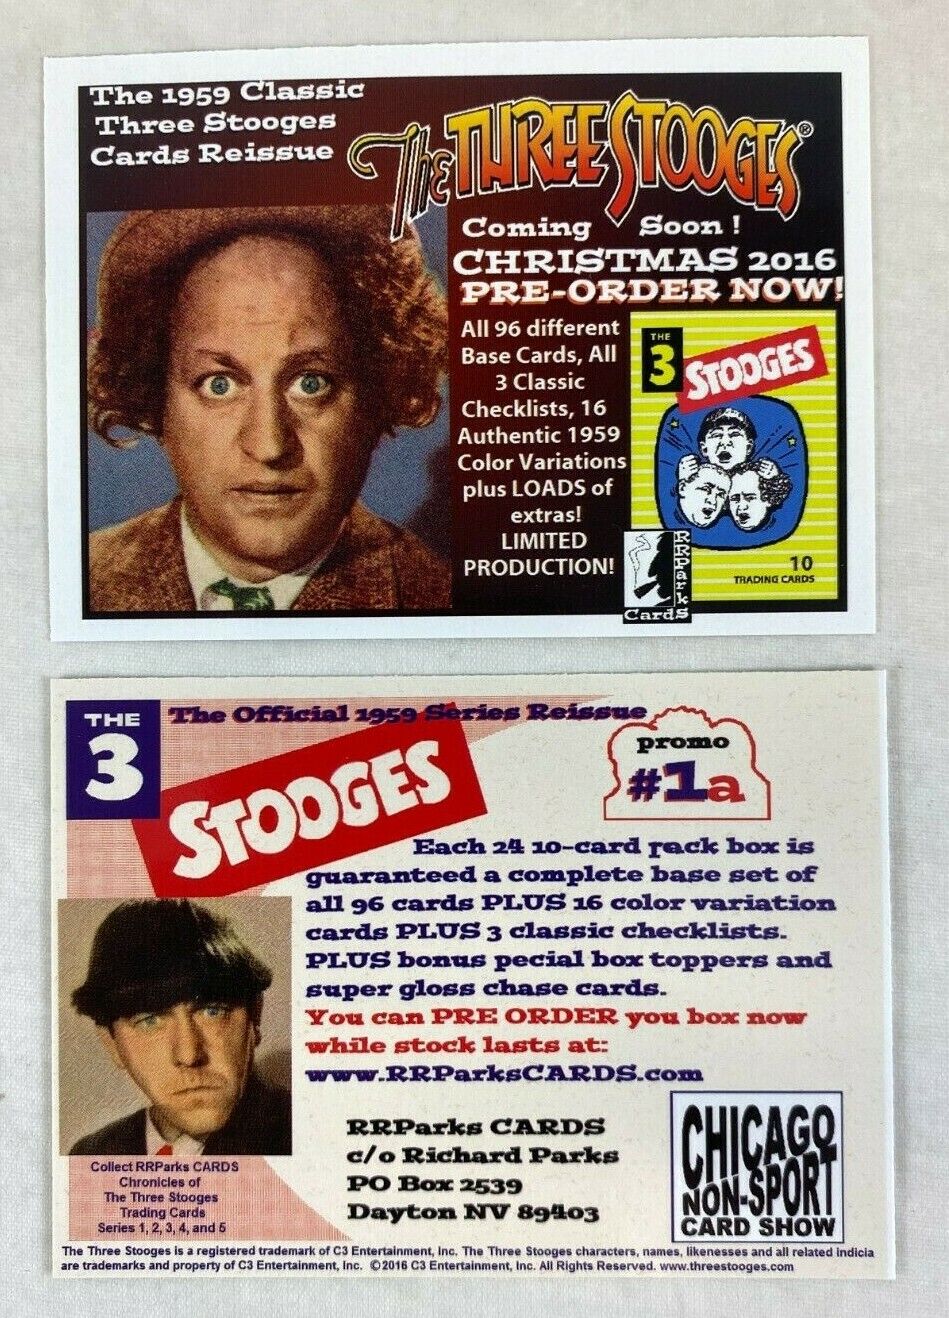 CHEAP PROMO CARD: THE THREE STOOGES (1959 REISSUE) 2016 RRParks #1a CHICAGO SHOW